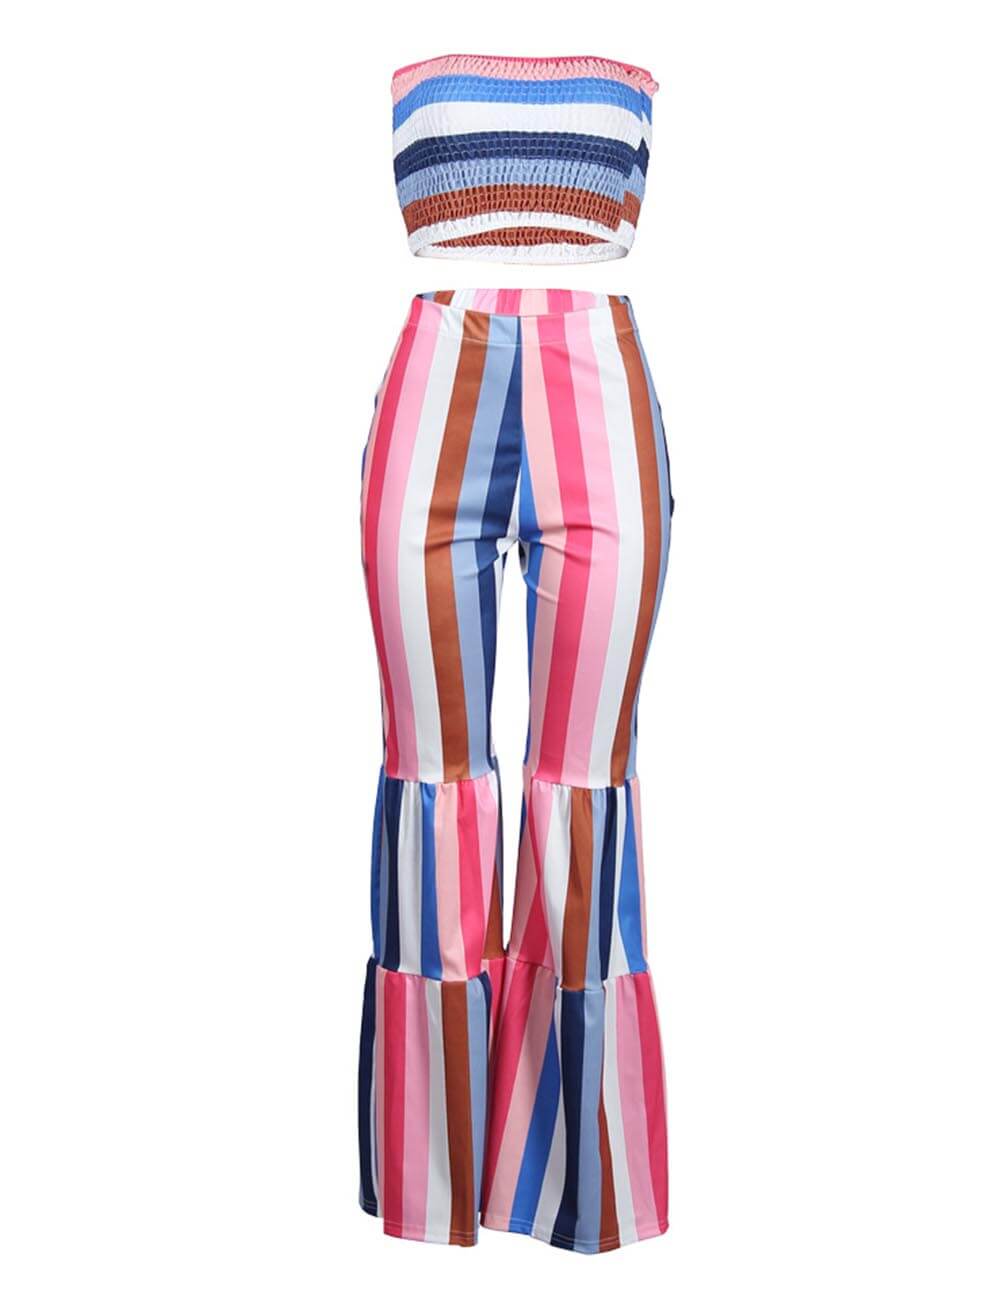  Women's Rainbow Striped Strapless Jumpsuit Printed Long Romper Tube Crop Top Wide Leg Pants 2 Pieces Outfits Set